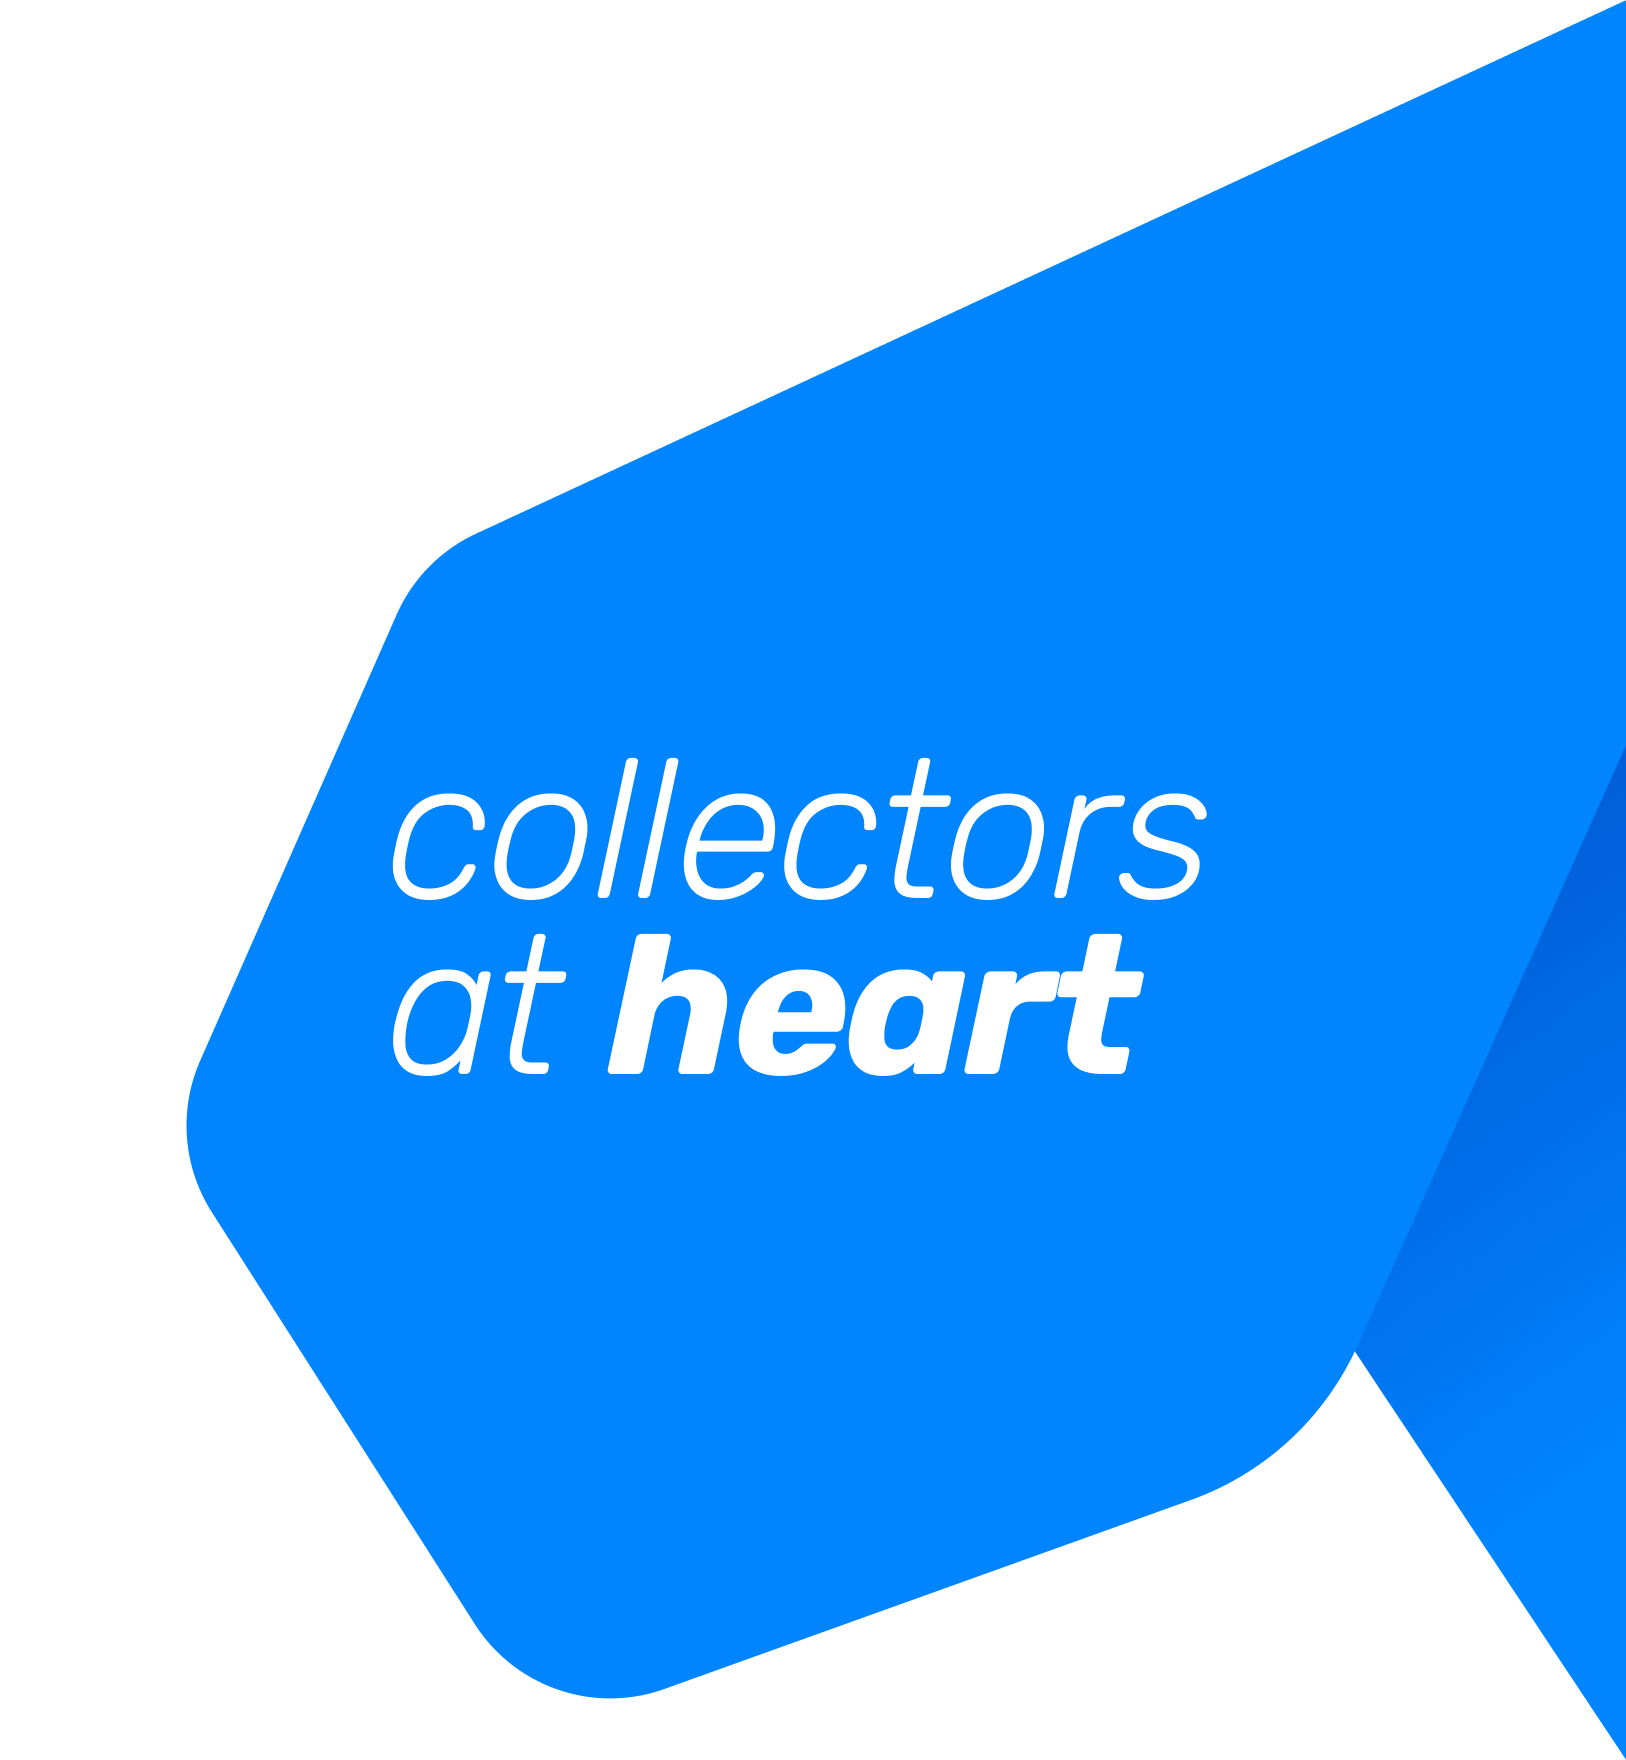 Ribbon with the text 'collectors at heart'